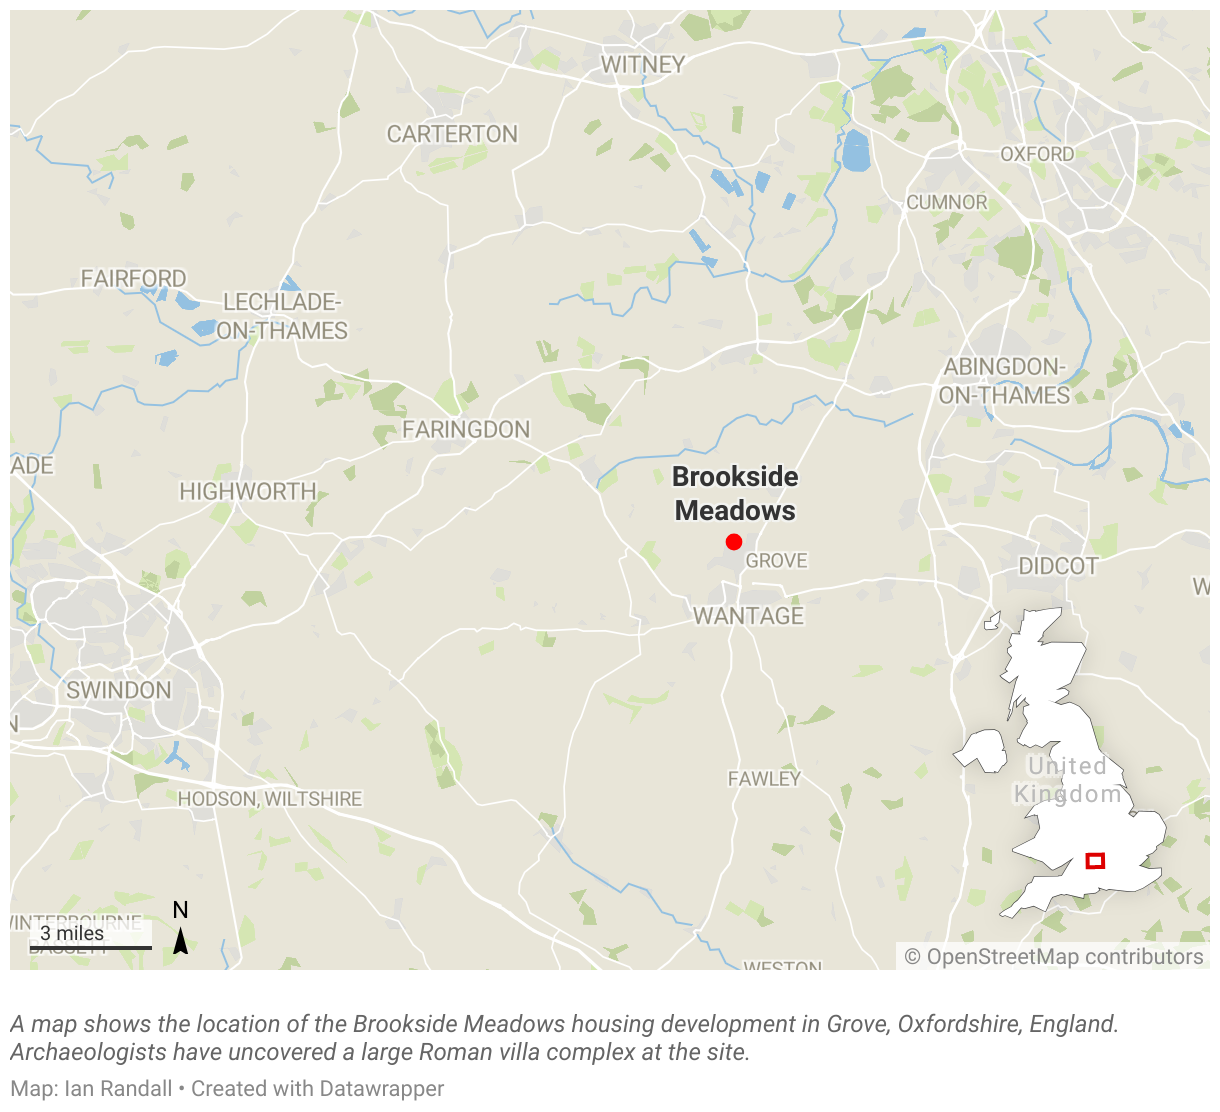 A map shows the location of the Brookside Meadows housing development in Grove, Oxfordshire, England.